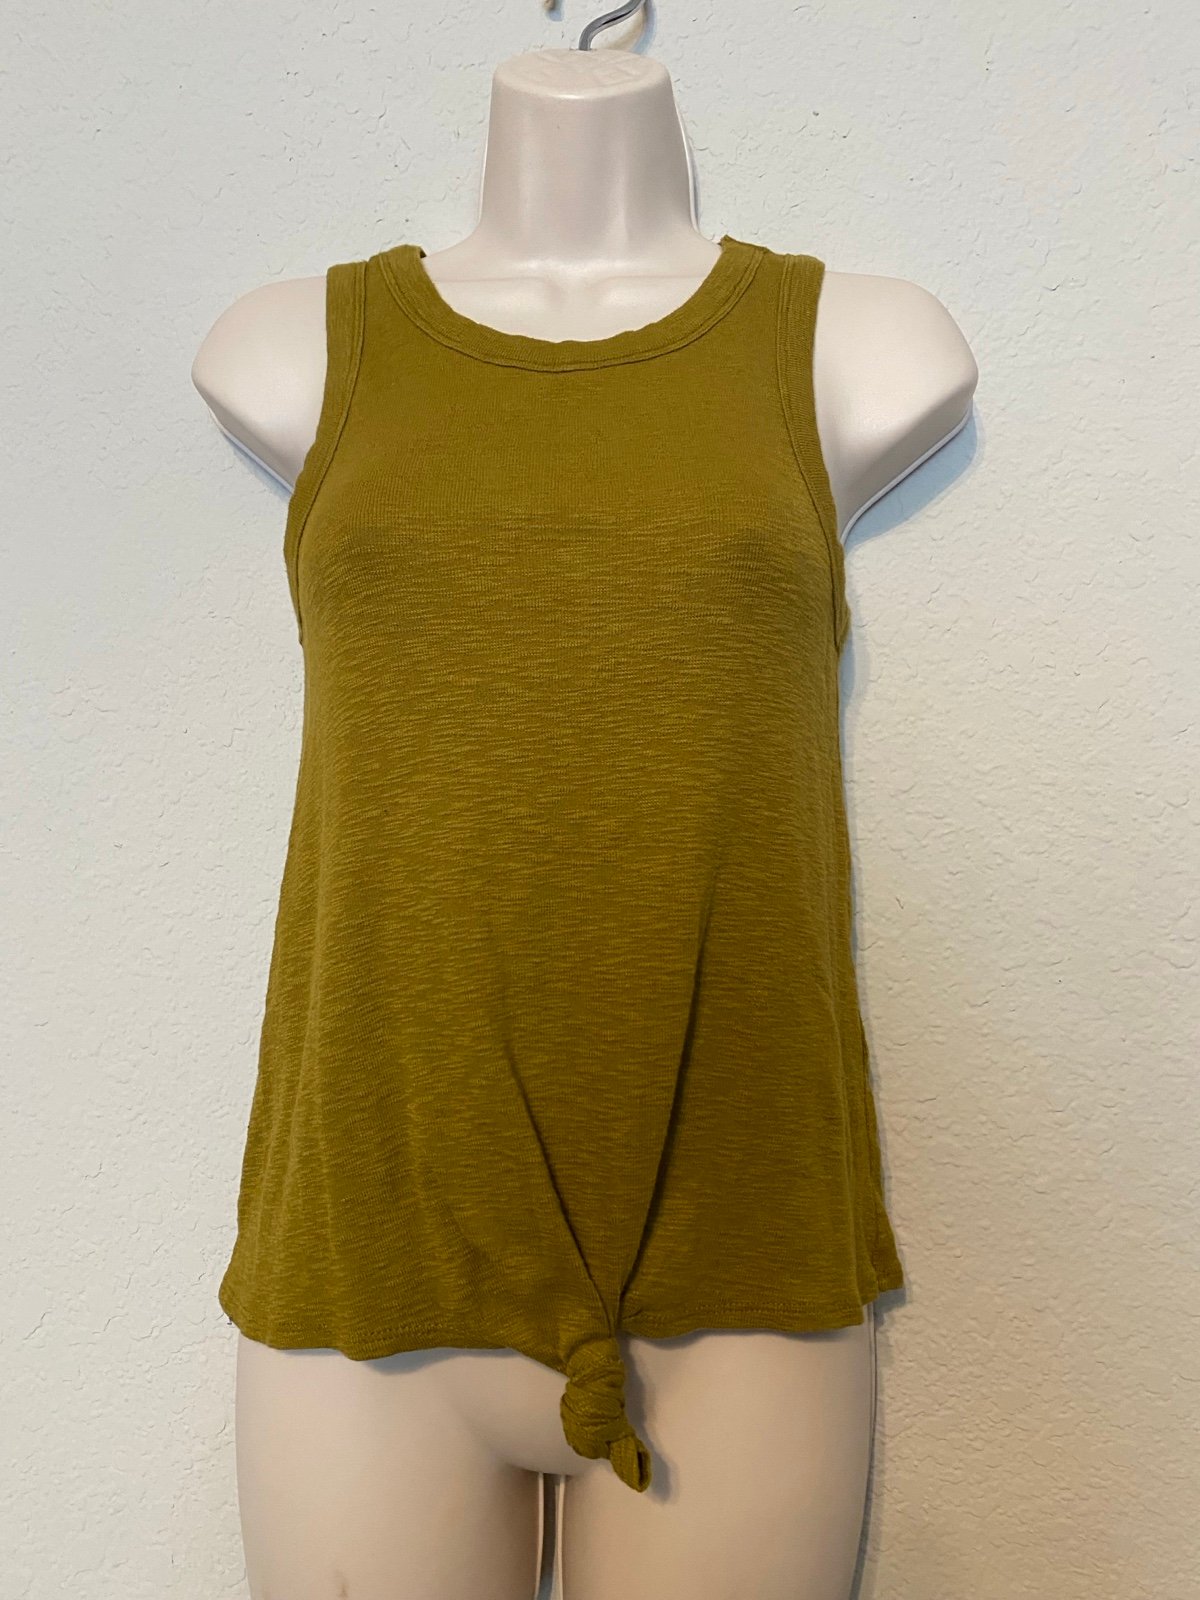 cheapest place to buy  Madewell mustard Tank Top GrBxFIie8 best sale